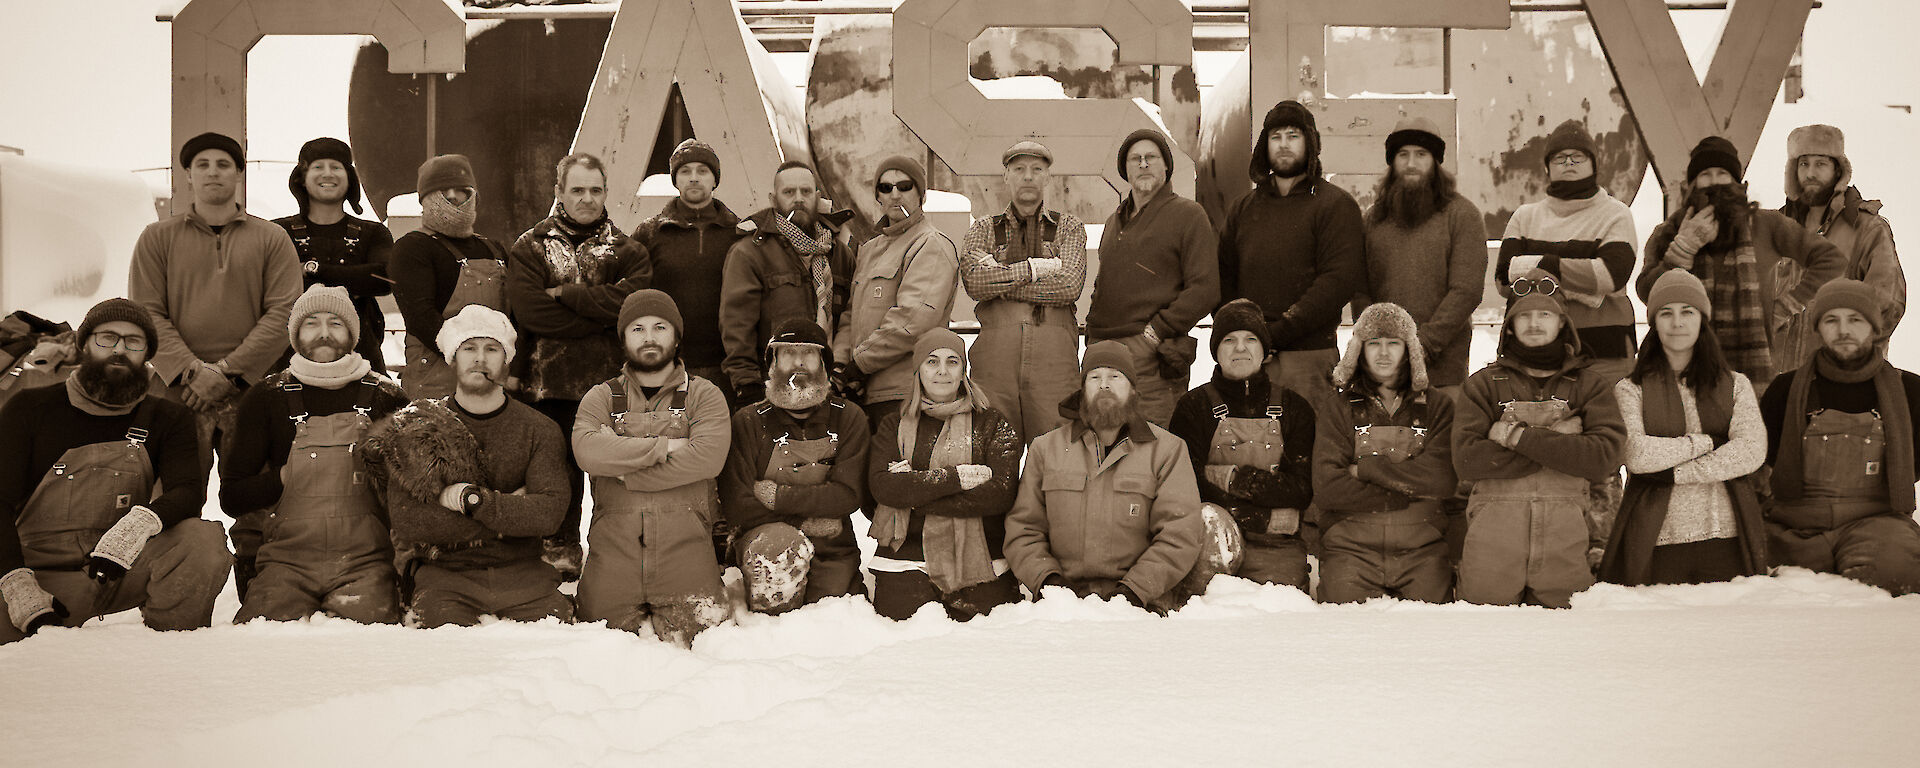 Sepia photo of group of 26 expeditioners, back row standing and front row kneeling, in front of large metal CASEY sign on low fuel farm tanks